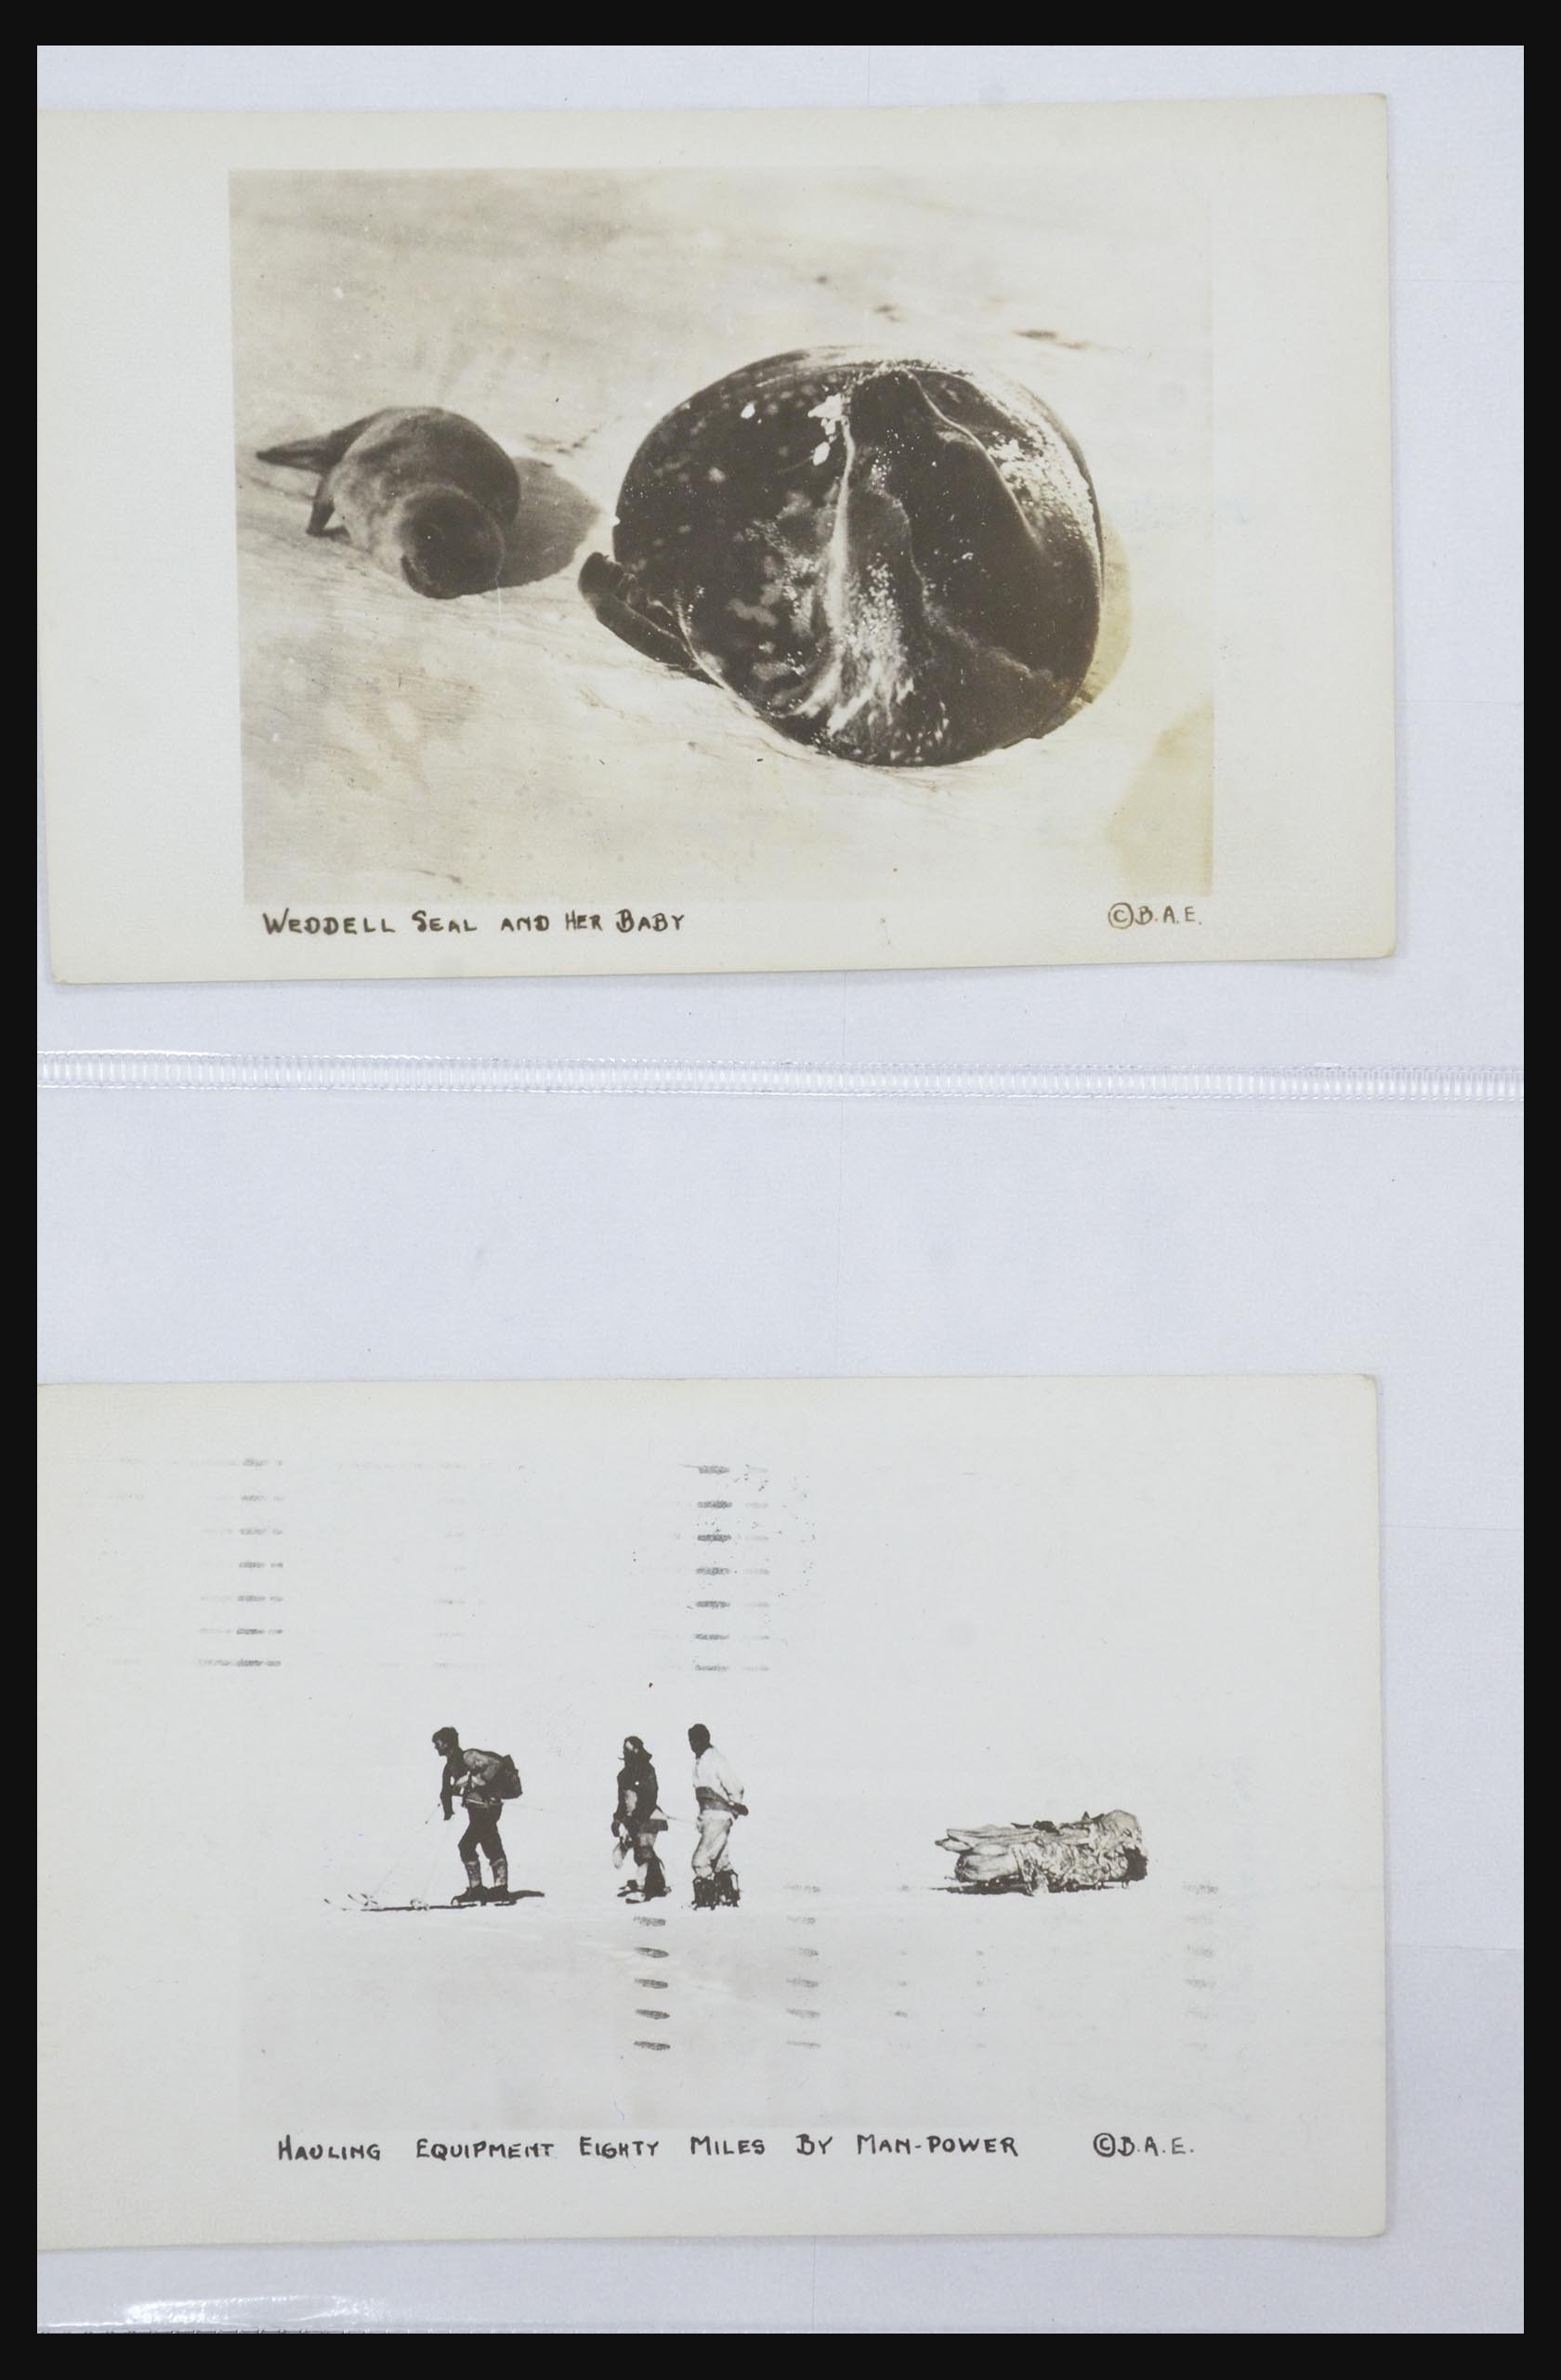 31627 017 - 31627 Byrd Antarctic Expedition 1934.